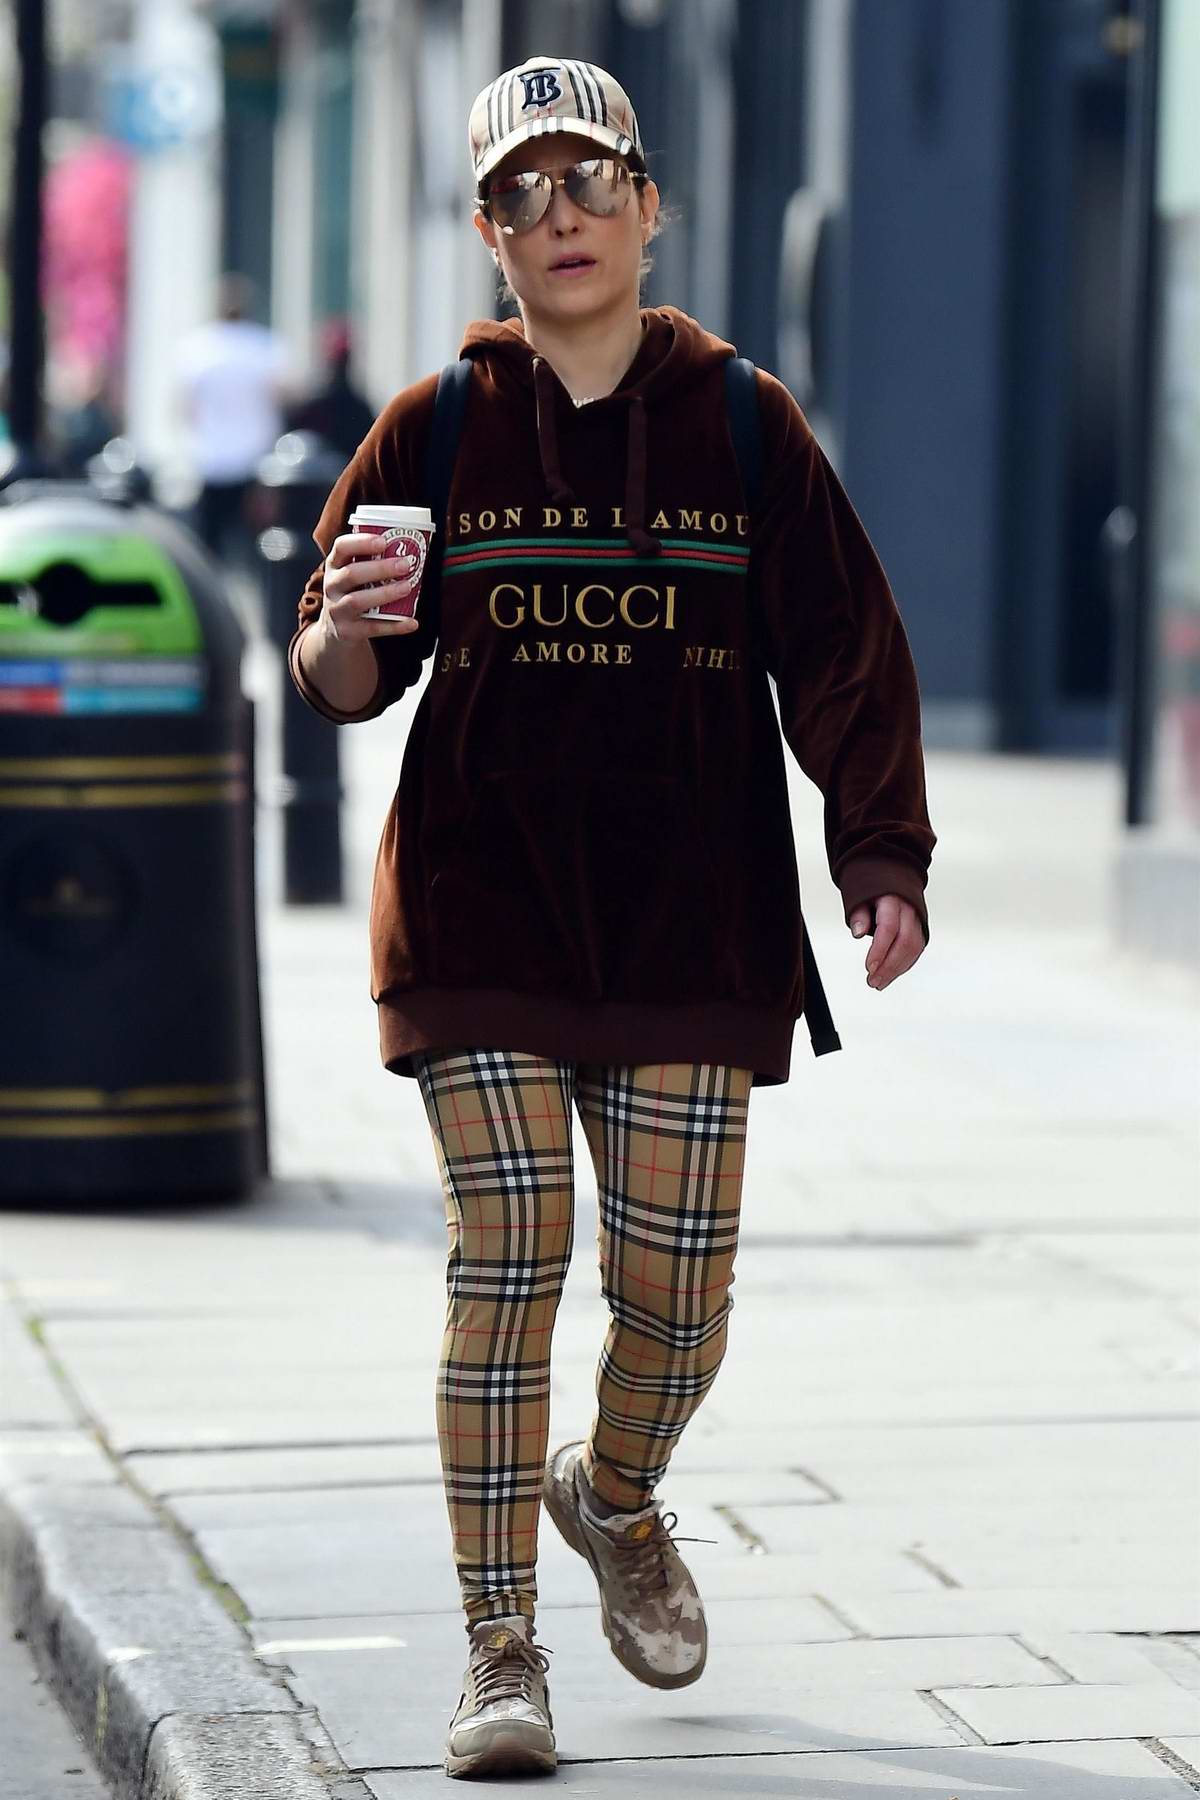 noomi rapace sports gucci hoodie and burberry check leggings while out  shopping at planet organic in london, uk-090420_4